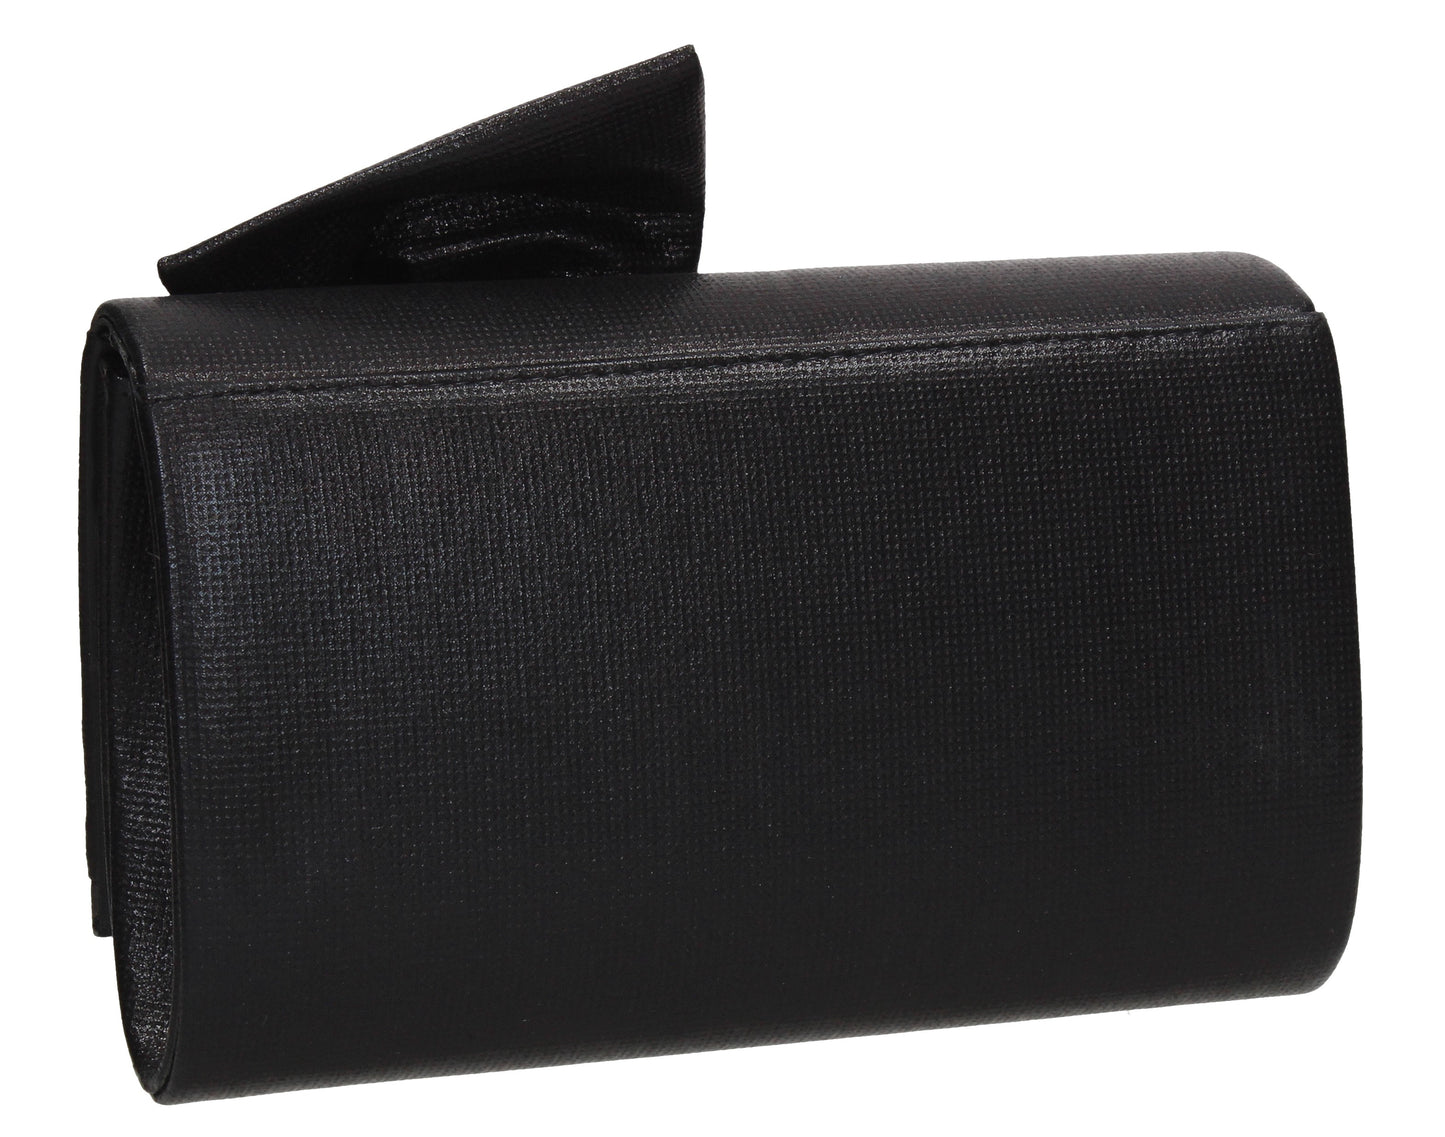 June Bow Style Clutch Bag Black